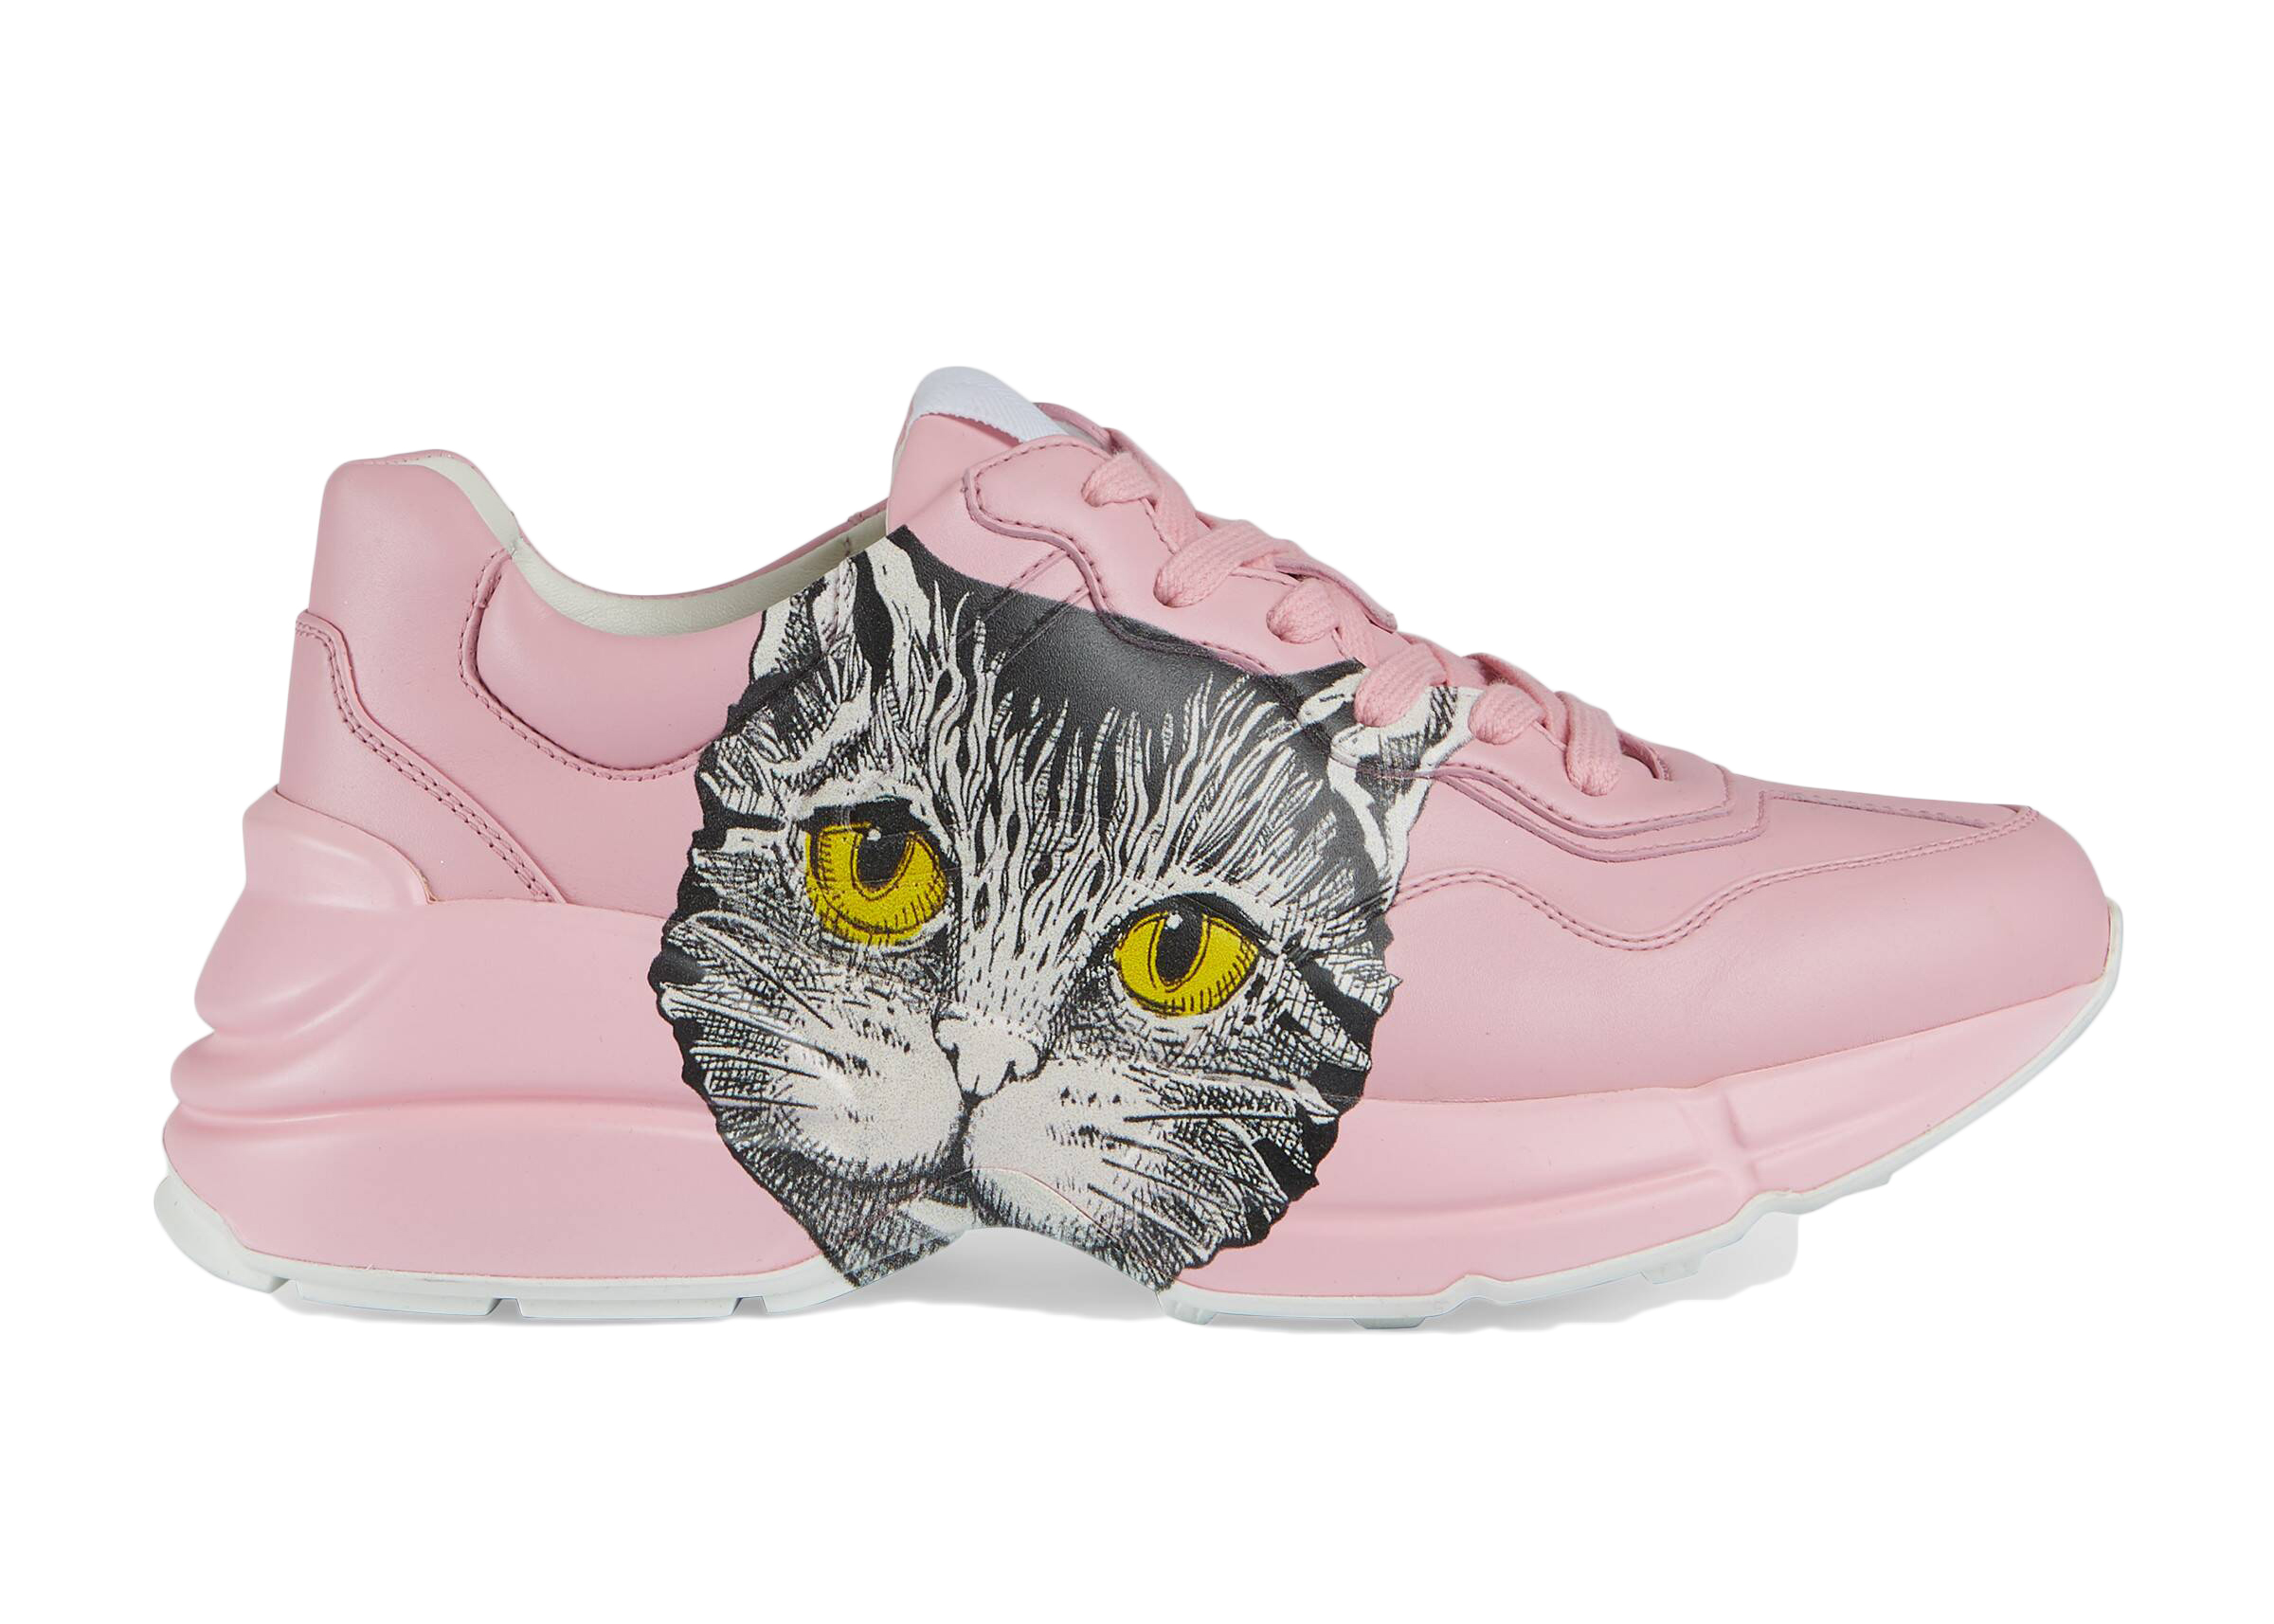 gucci shoes with cat